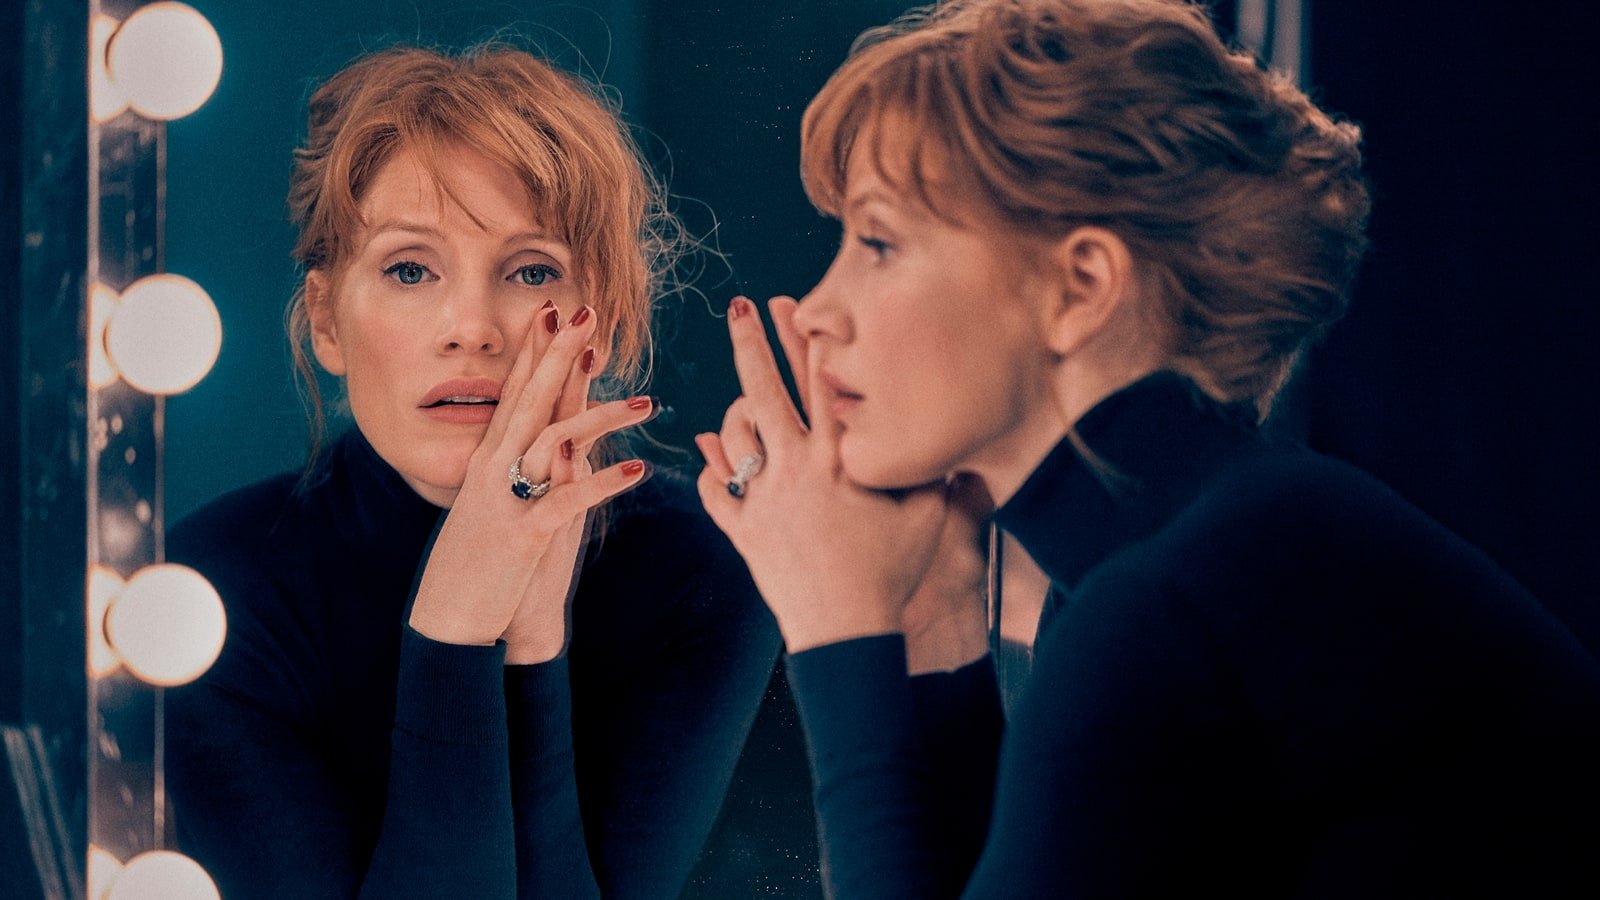 Get the best seats for A Doll's House starring Jessica Chastain at The Playhouse Theatre!